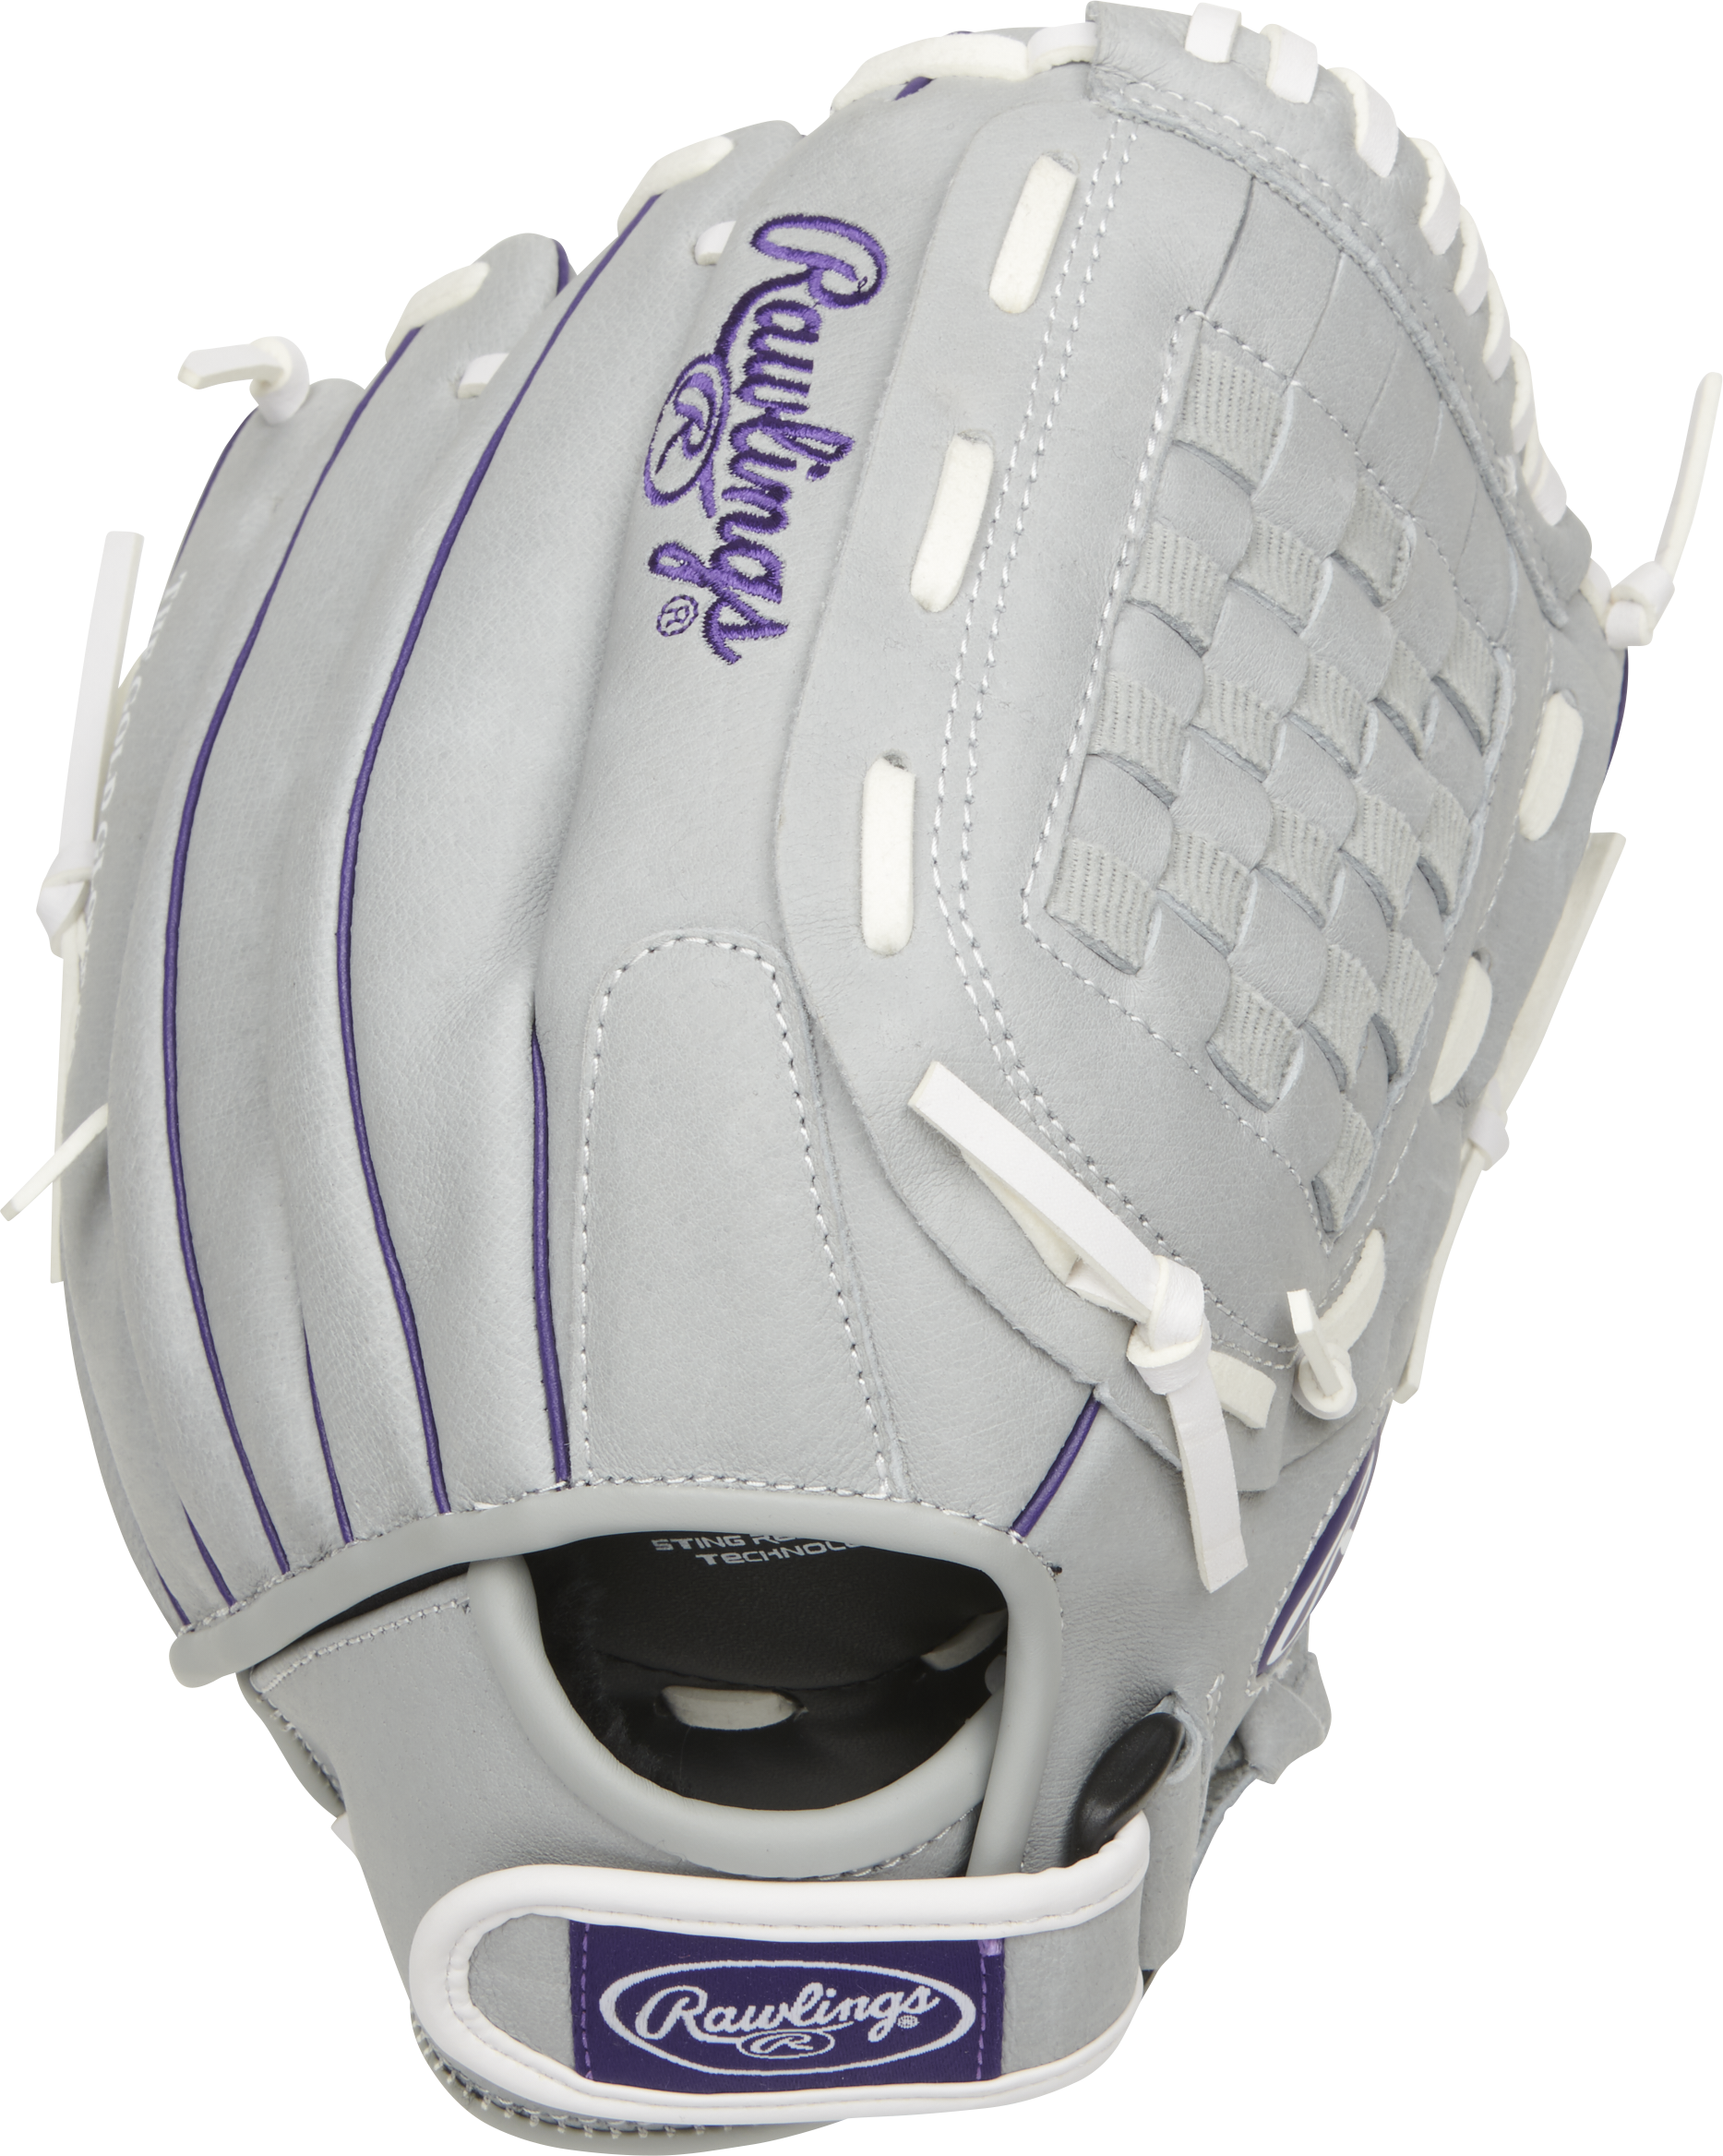 Rawlings Sure Catch 12" Infield / Outfield Softball Glove